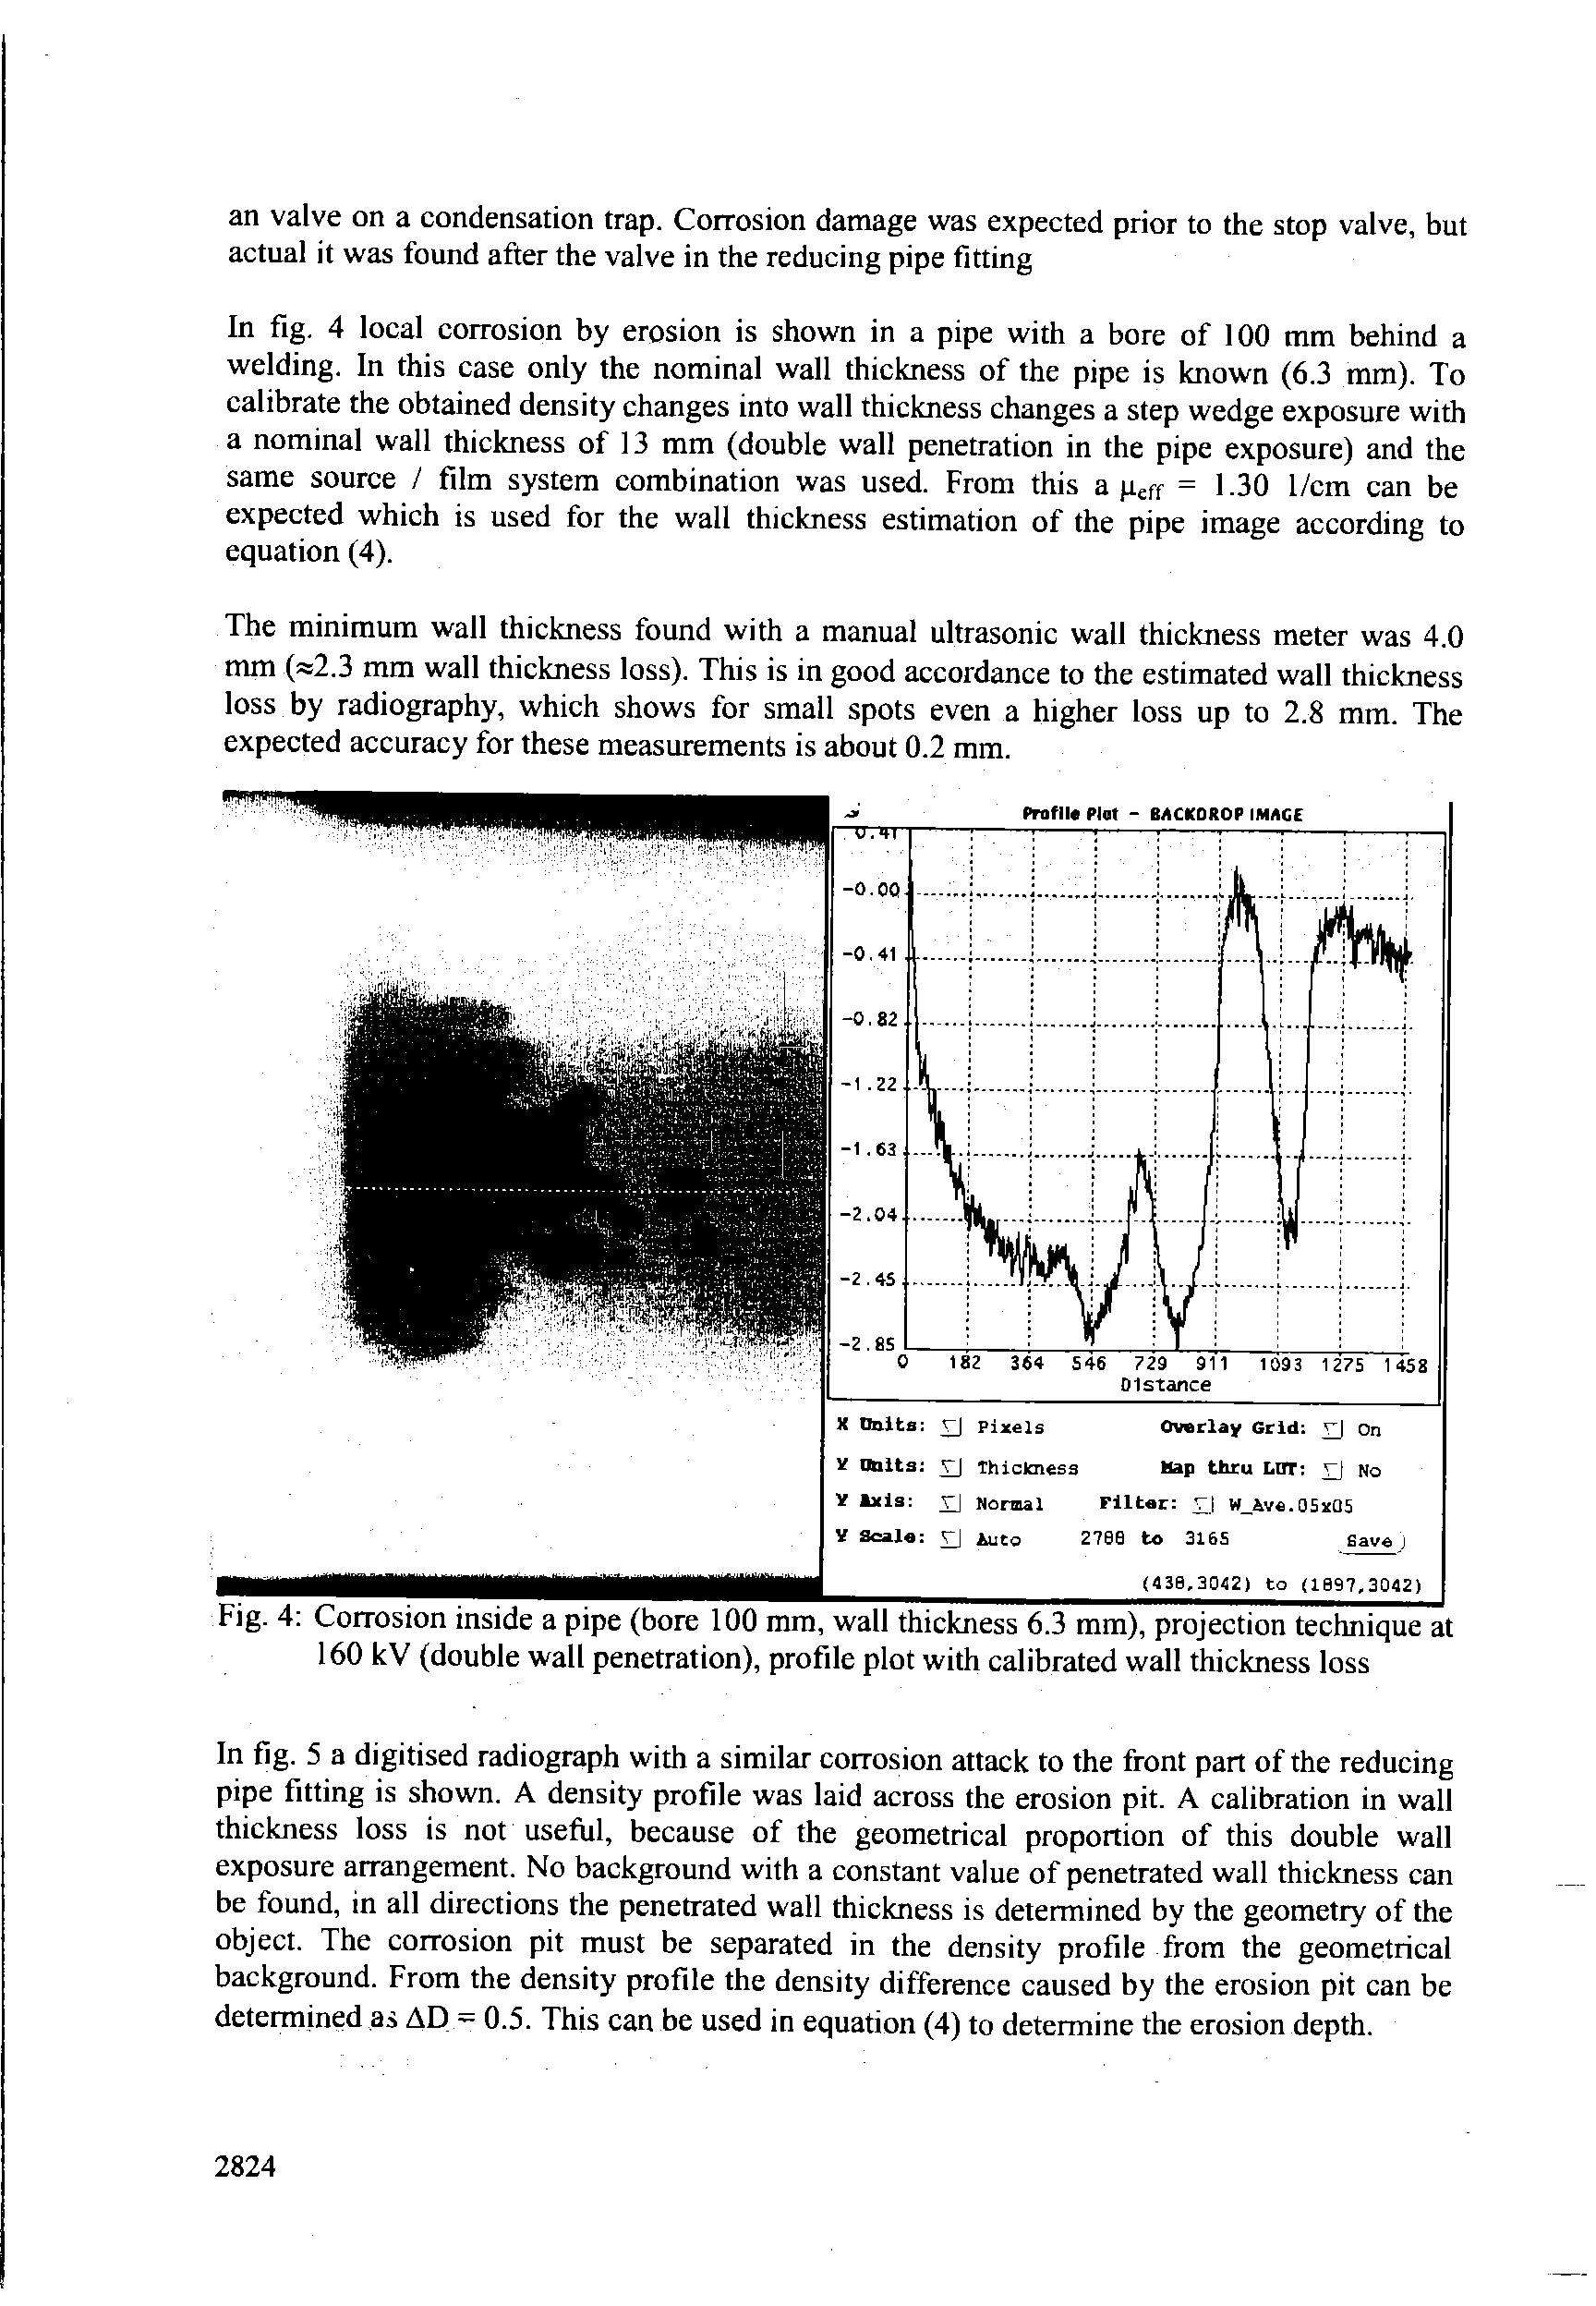 Fig. 4 Corrosion inside a pipe (bore 100 mm, wall thickness 6.3 mm), projection technique at 160 kV (double wall penetration), profile plot with calibrated wall thickness loss...